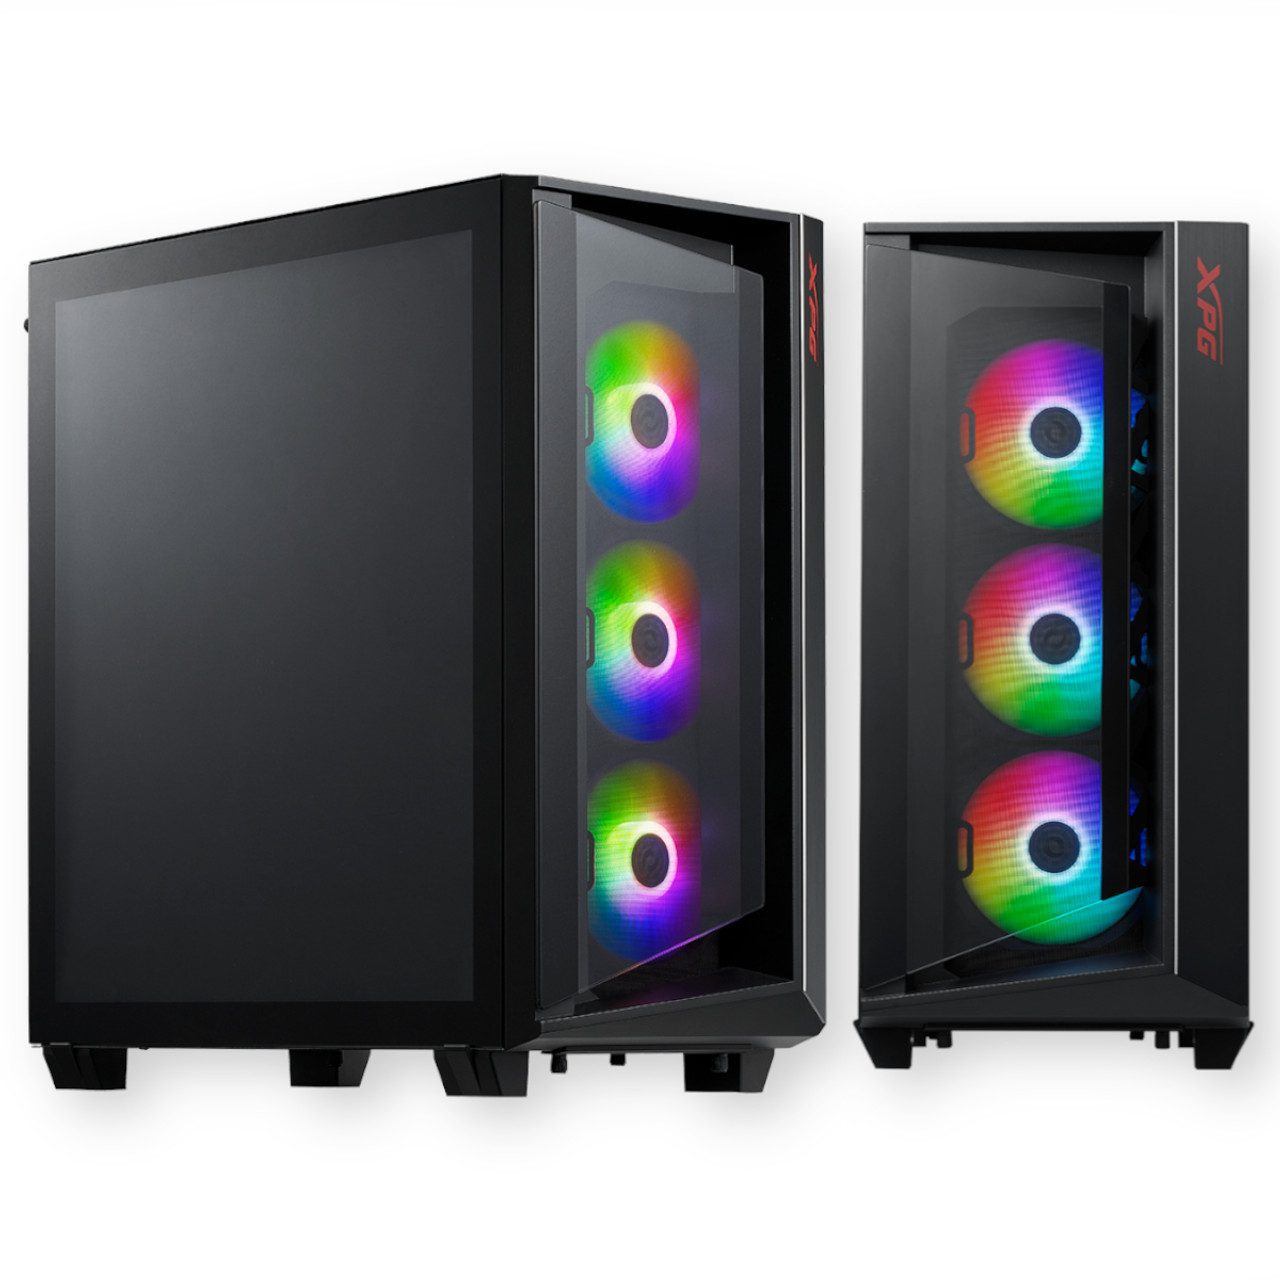 XPG Cruiserst Tempered Glass Mid-Tower Case Includes 3 ARGB Fans